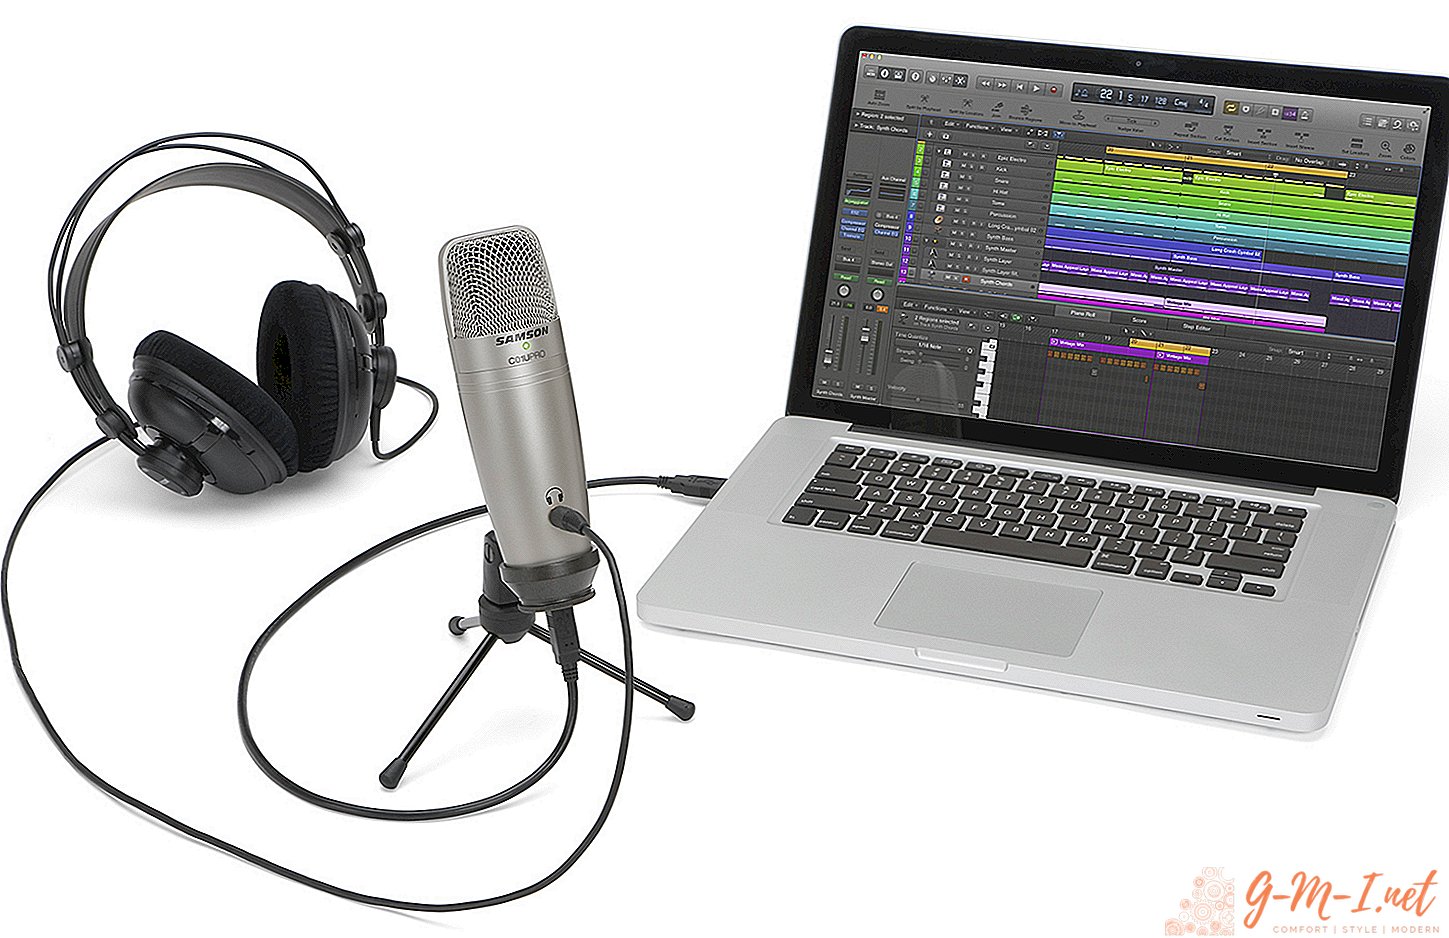 How to record sound on a laptop